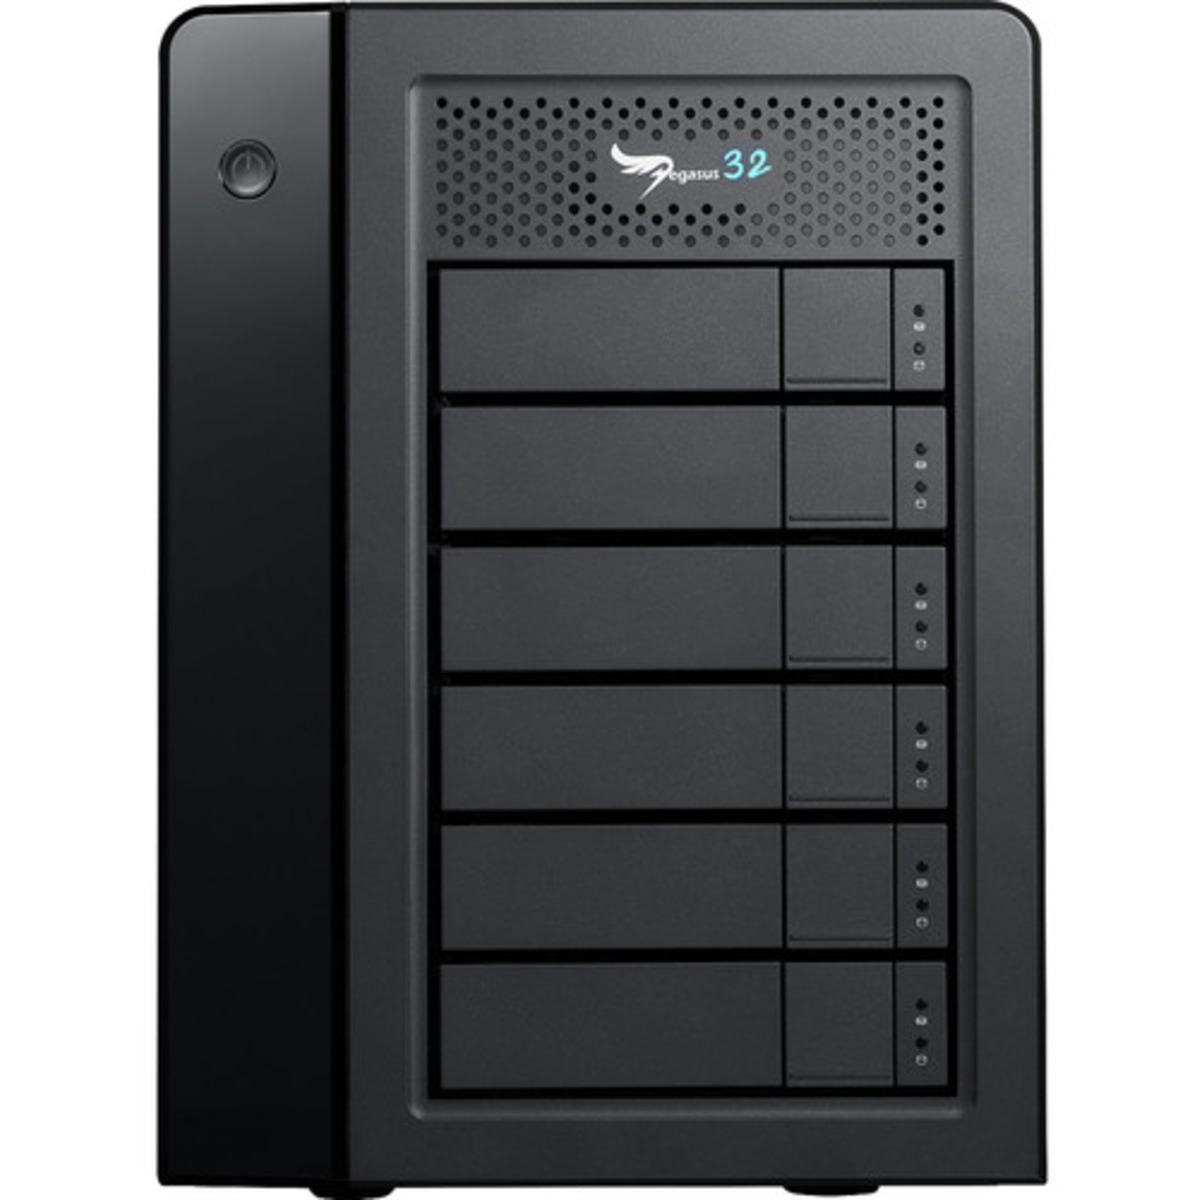 Promise Technology Pegasus32 R6 Thunderbolt 3 132tb 6-Bay Desktop Multimedia / Power User / Business DAS - Direct Attached Storage Device 6x22tb Western Digital Ultrastar HC580 SED WUH722422ALE6L1 3.5 7200rpm SATA 6Gb/s HDD ENTERPRISE Class Drives Installed - Burn-In Tested Pegasus32 R6 Thunderbolt 3